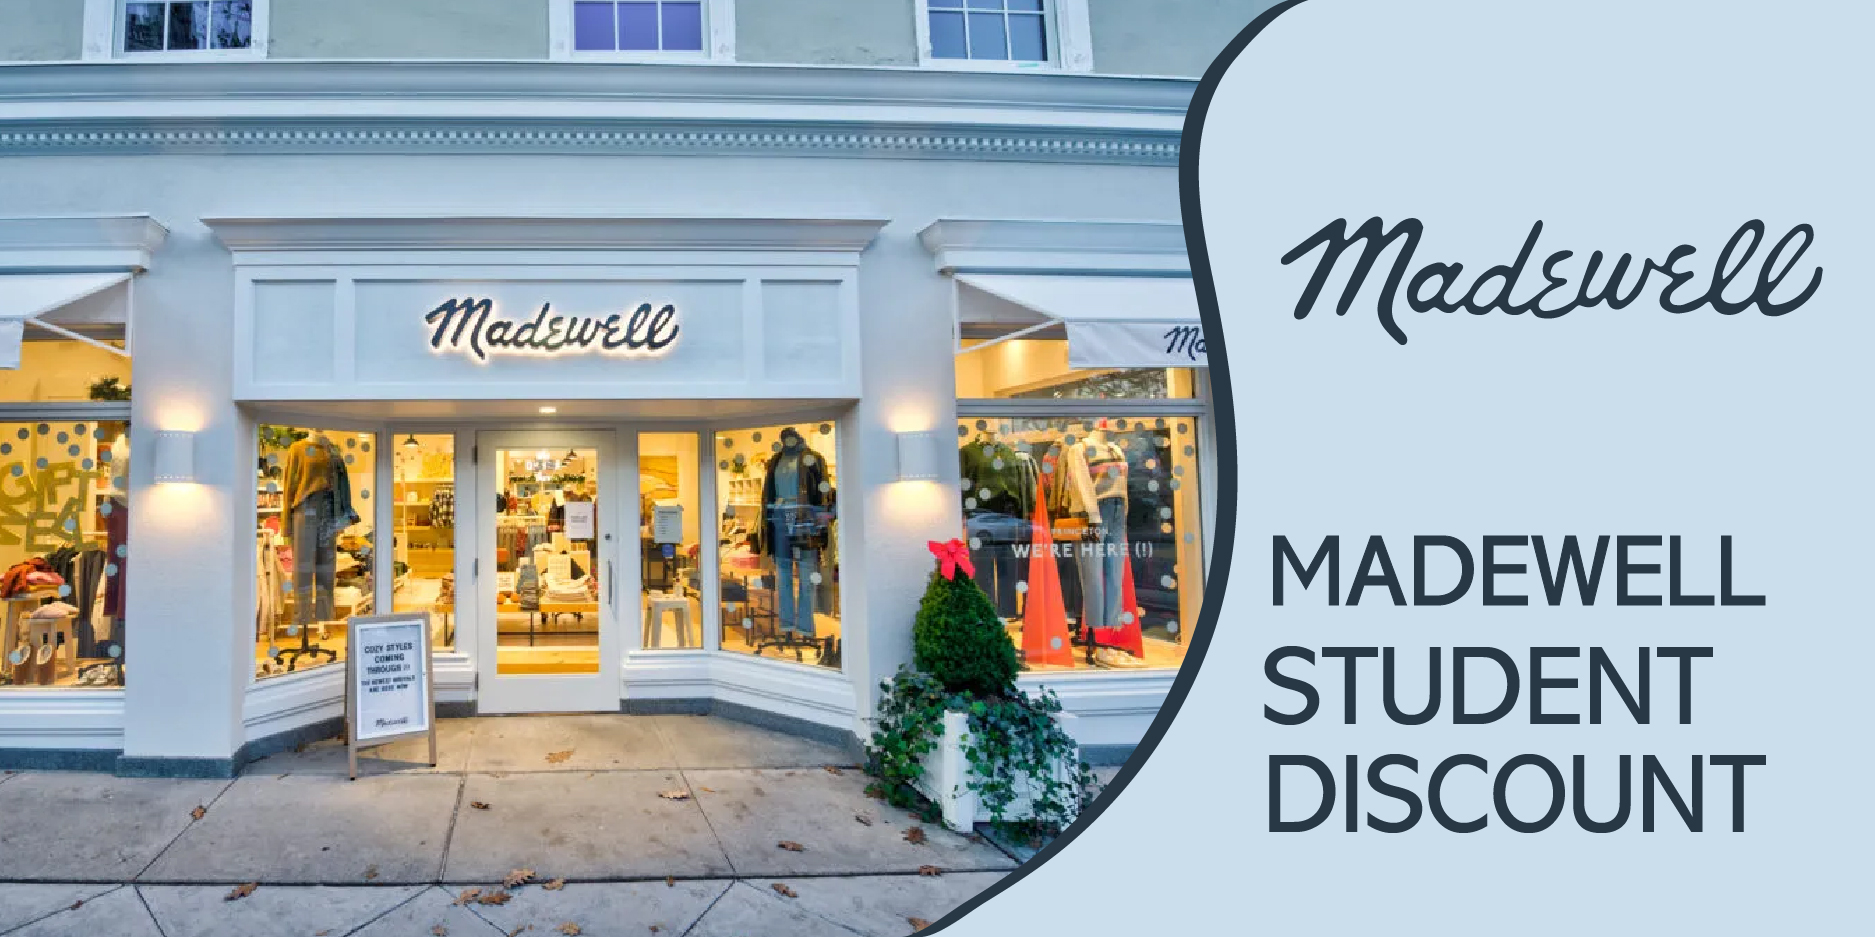 Madewell Student Discount